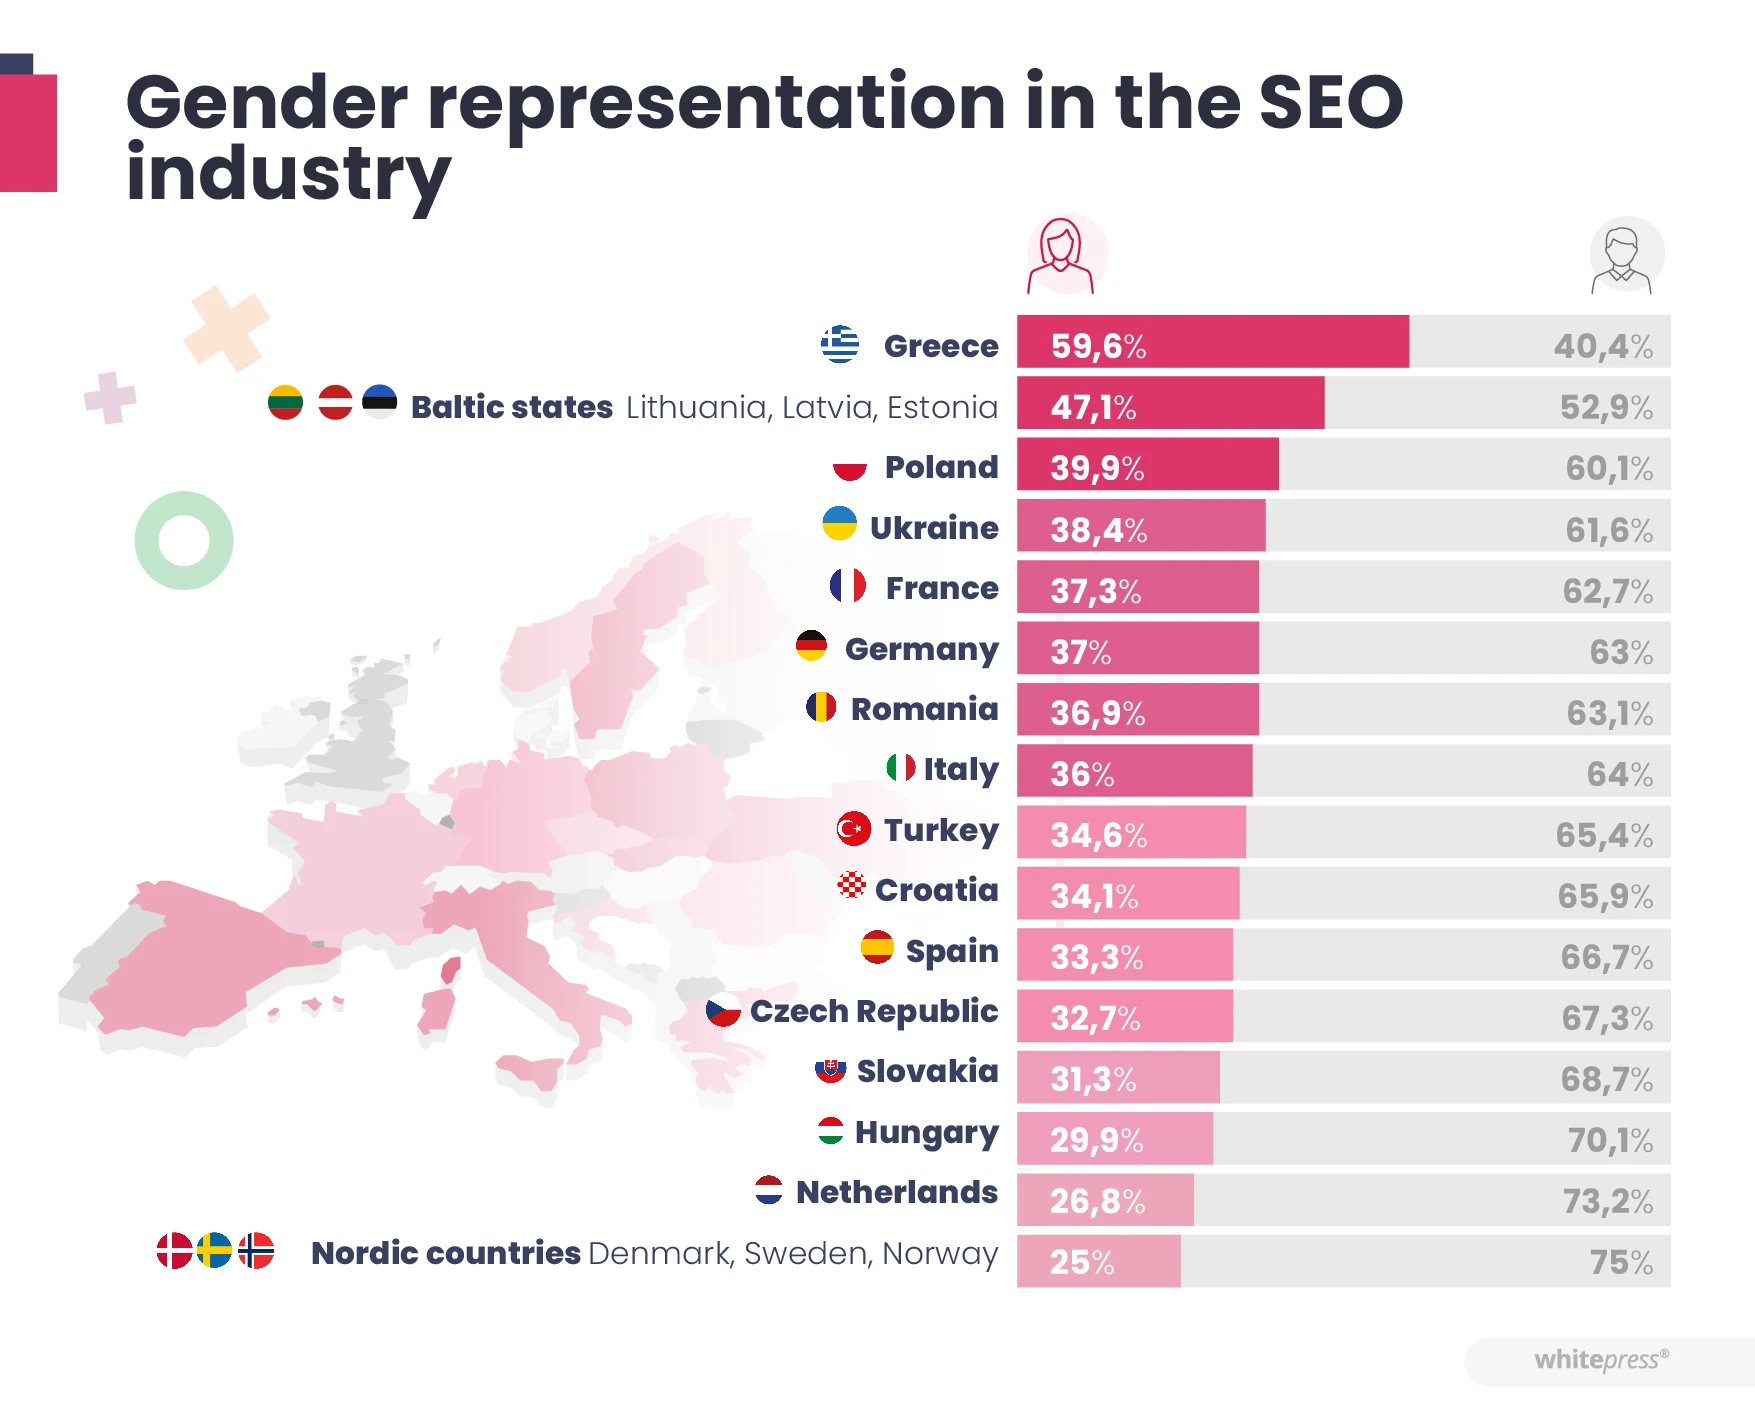 Gender representation in the SEO industry - by country